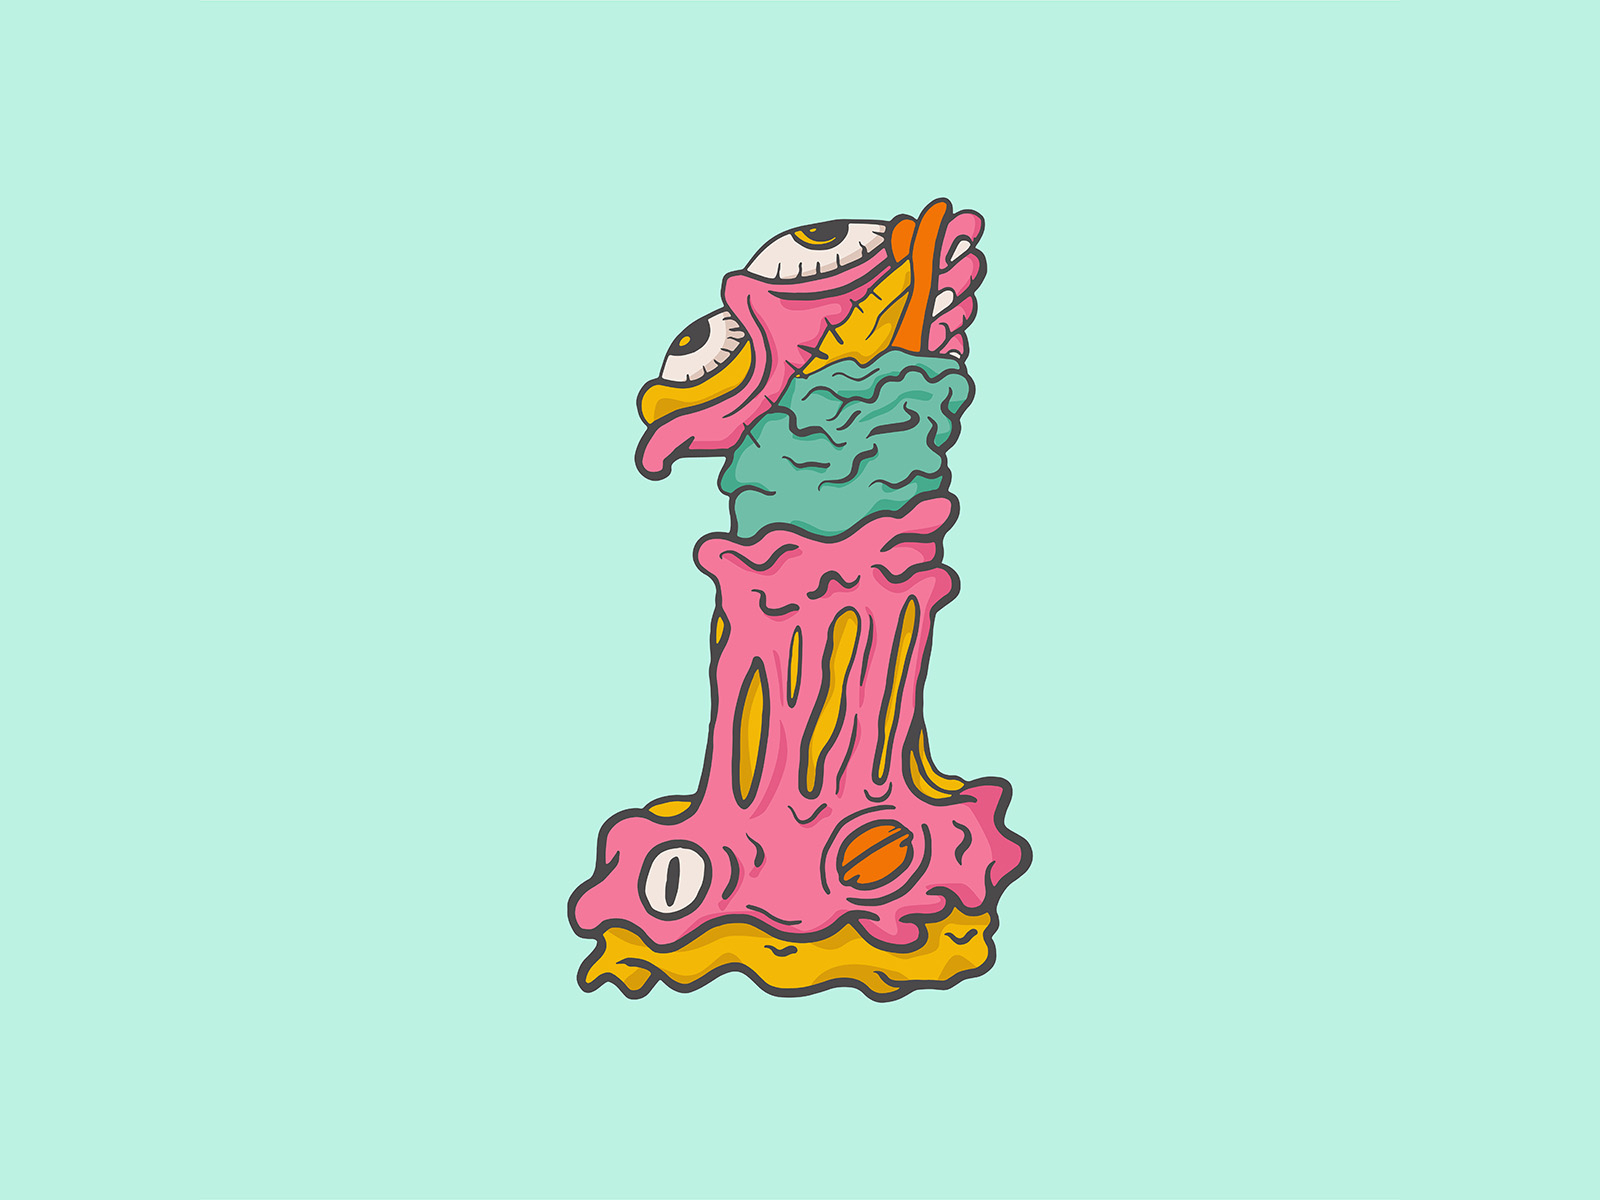 Number One (1) Doodle by REPI PUTRA on Dribbble